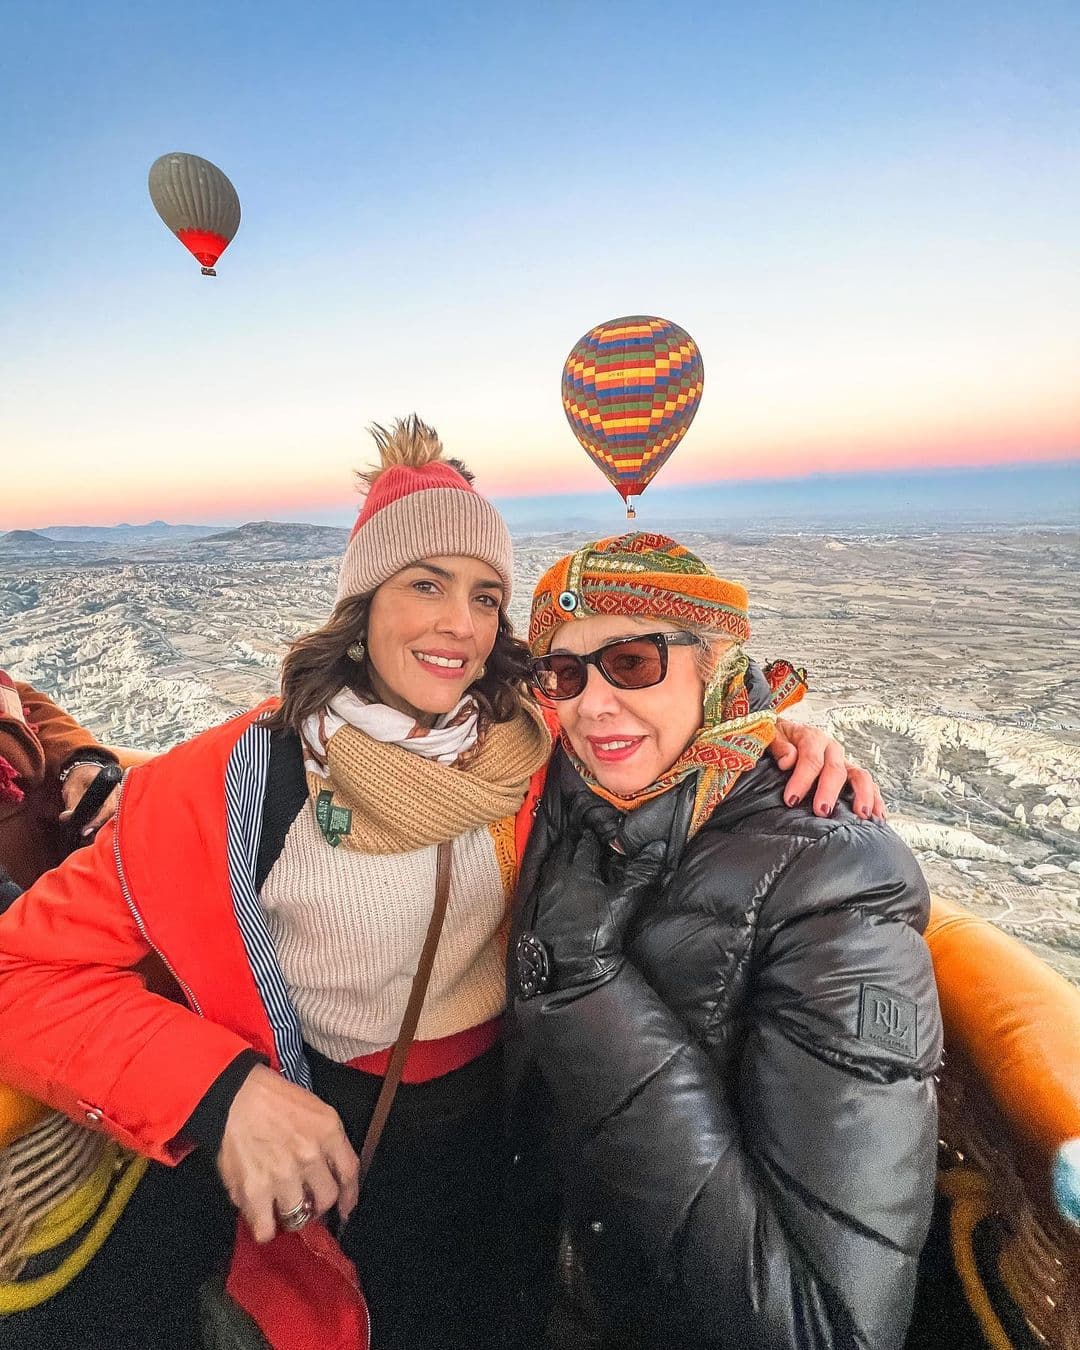 Cappadocia Activities: Discover the Best Things to Do in Cappadocia